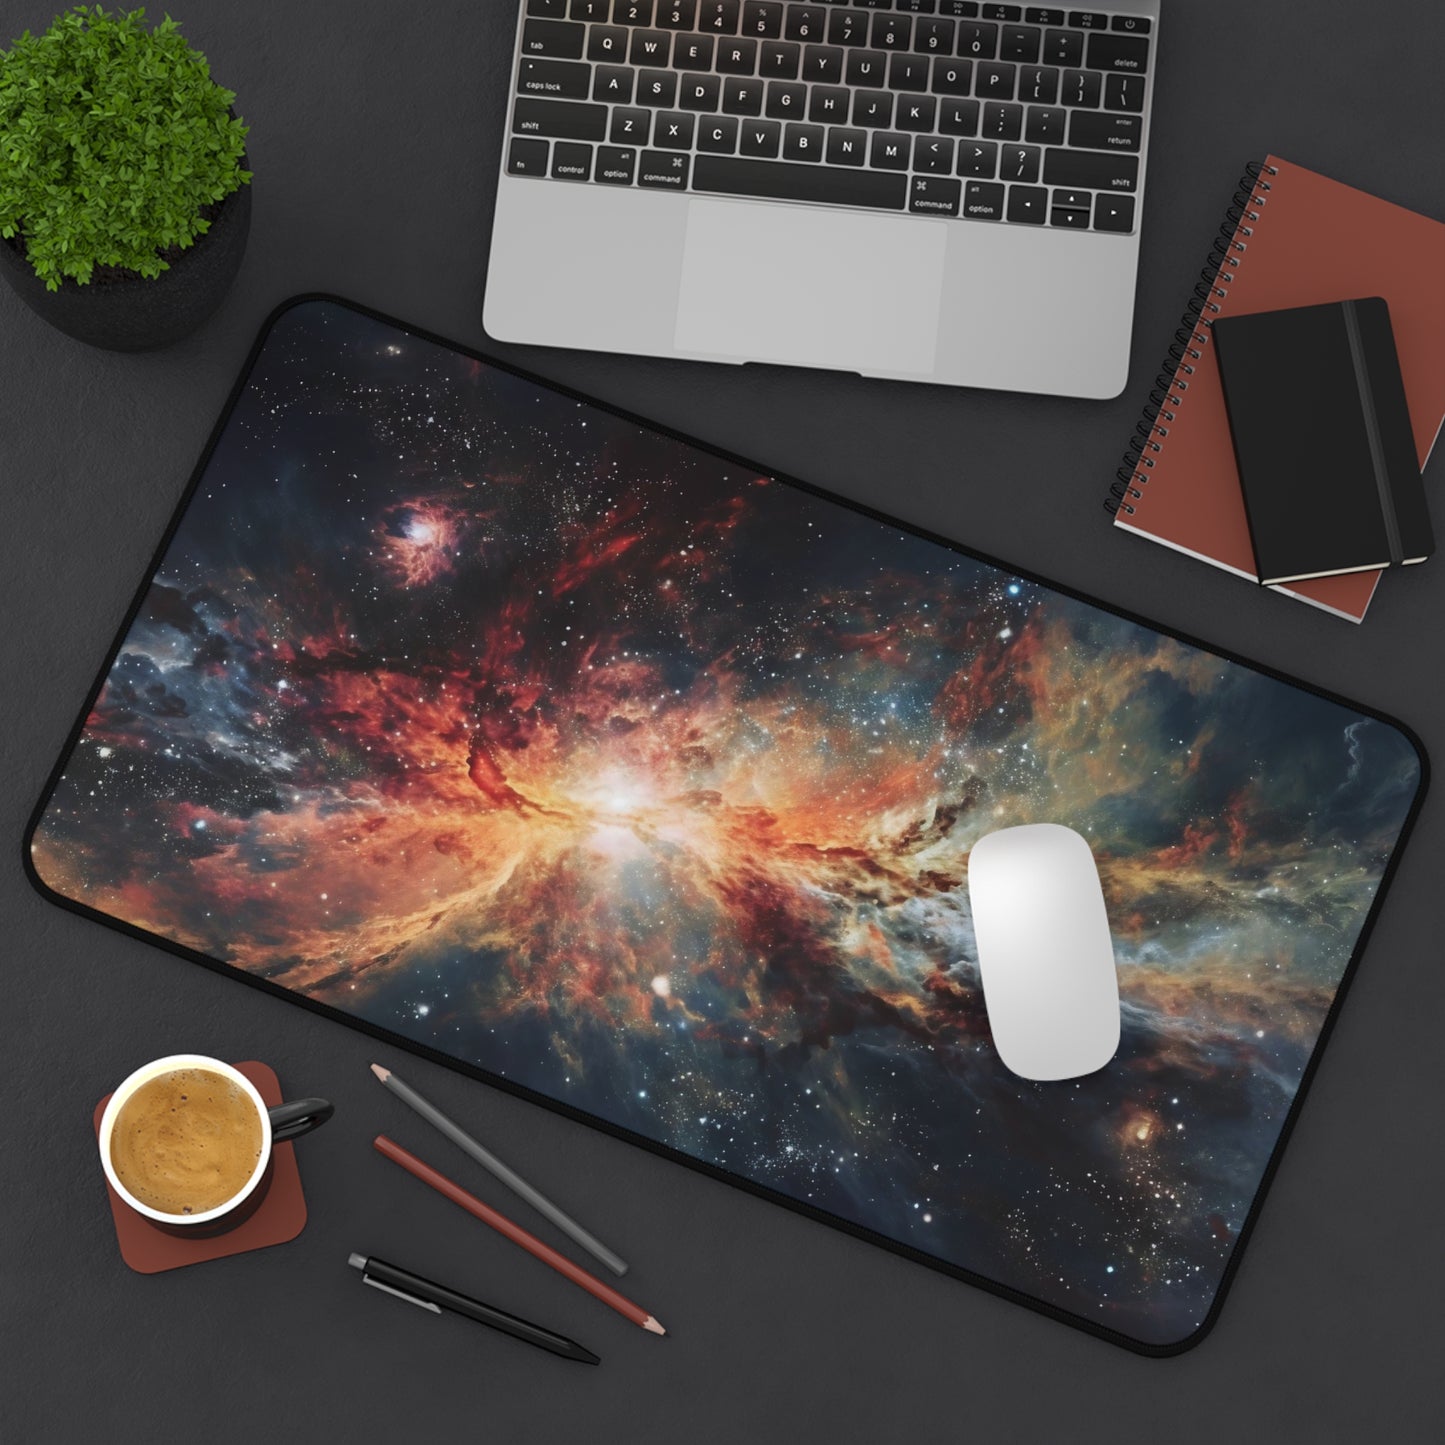 Nebula Desk Mat, Universe Desk Pad, Space Galactic Cosmic Workspace, Extra Large Mouse Pad, Outer Space Keyboard Mat, Cosmos Desk Accessory